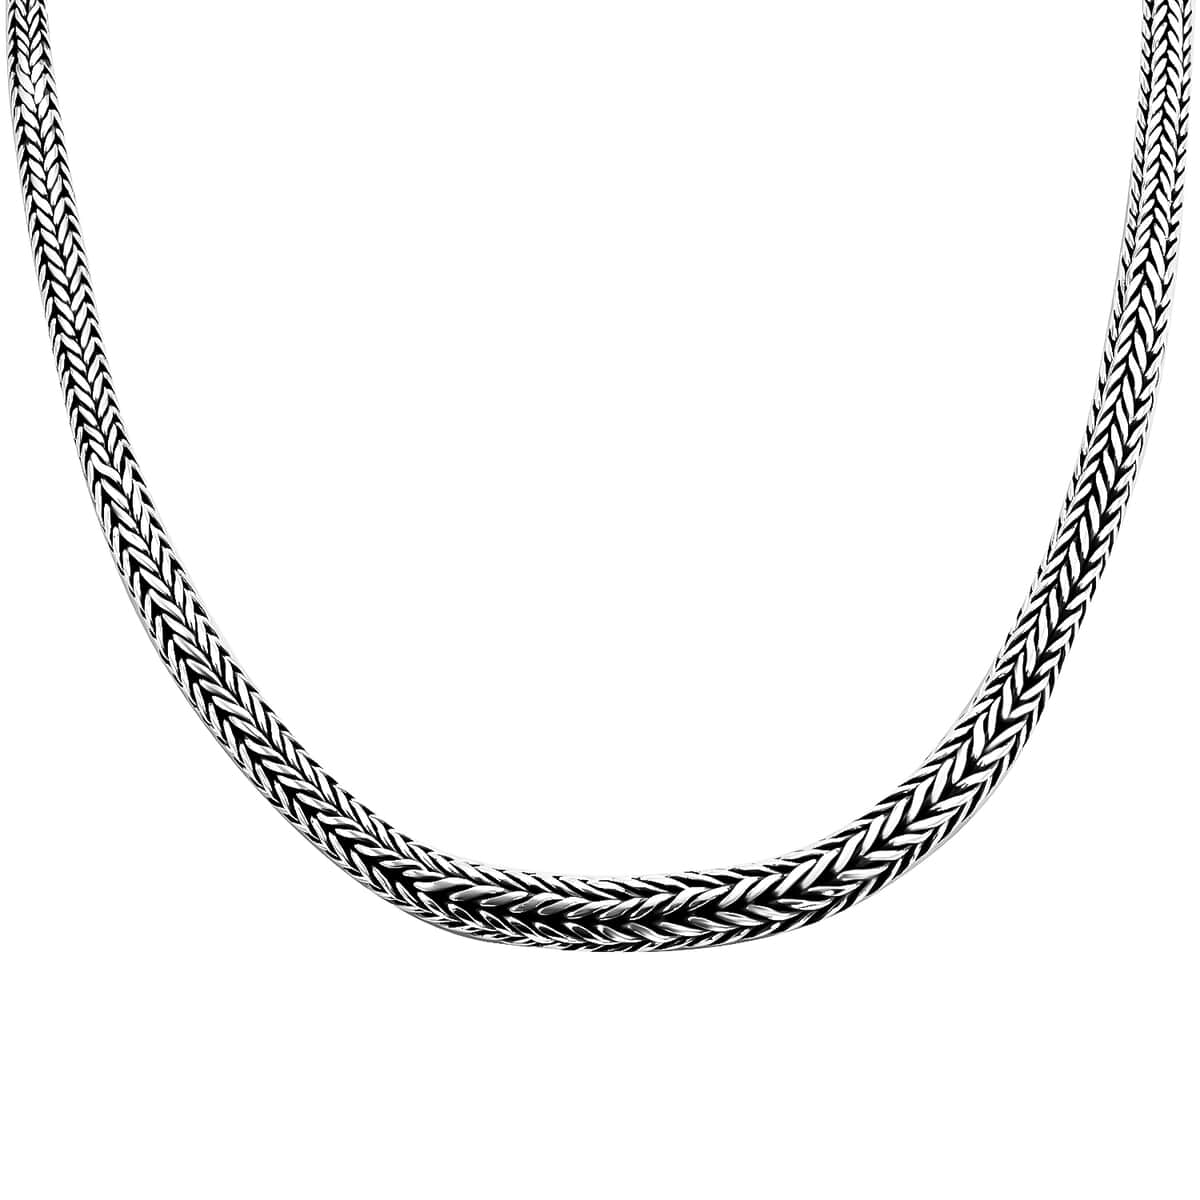 Bali Legacy, Tulang Naga Chain in Sterling Silver, Silver Braided Chain (20 Inches) image number 0